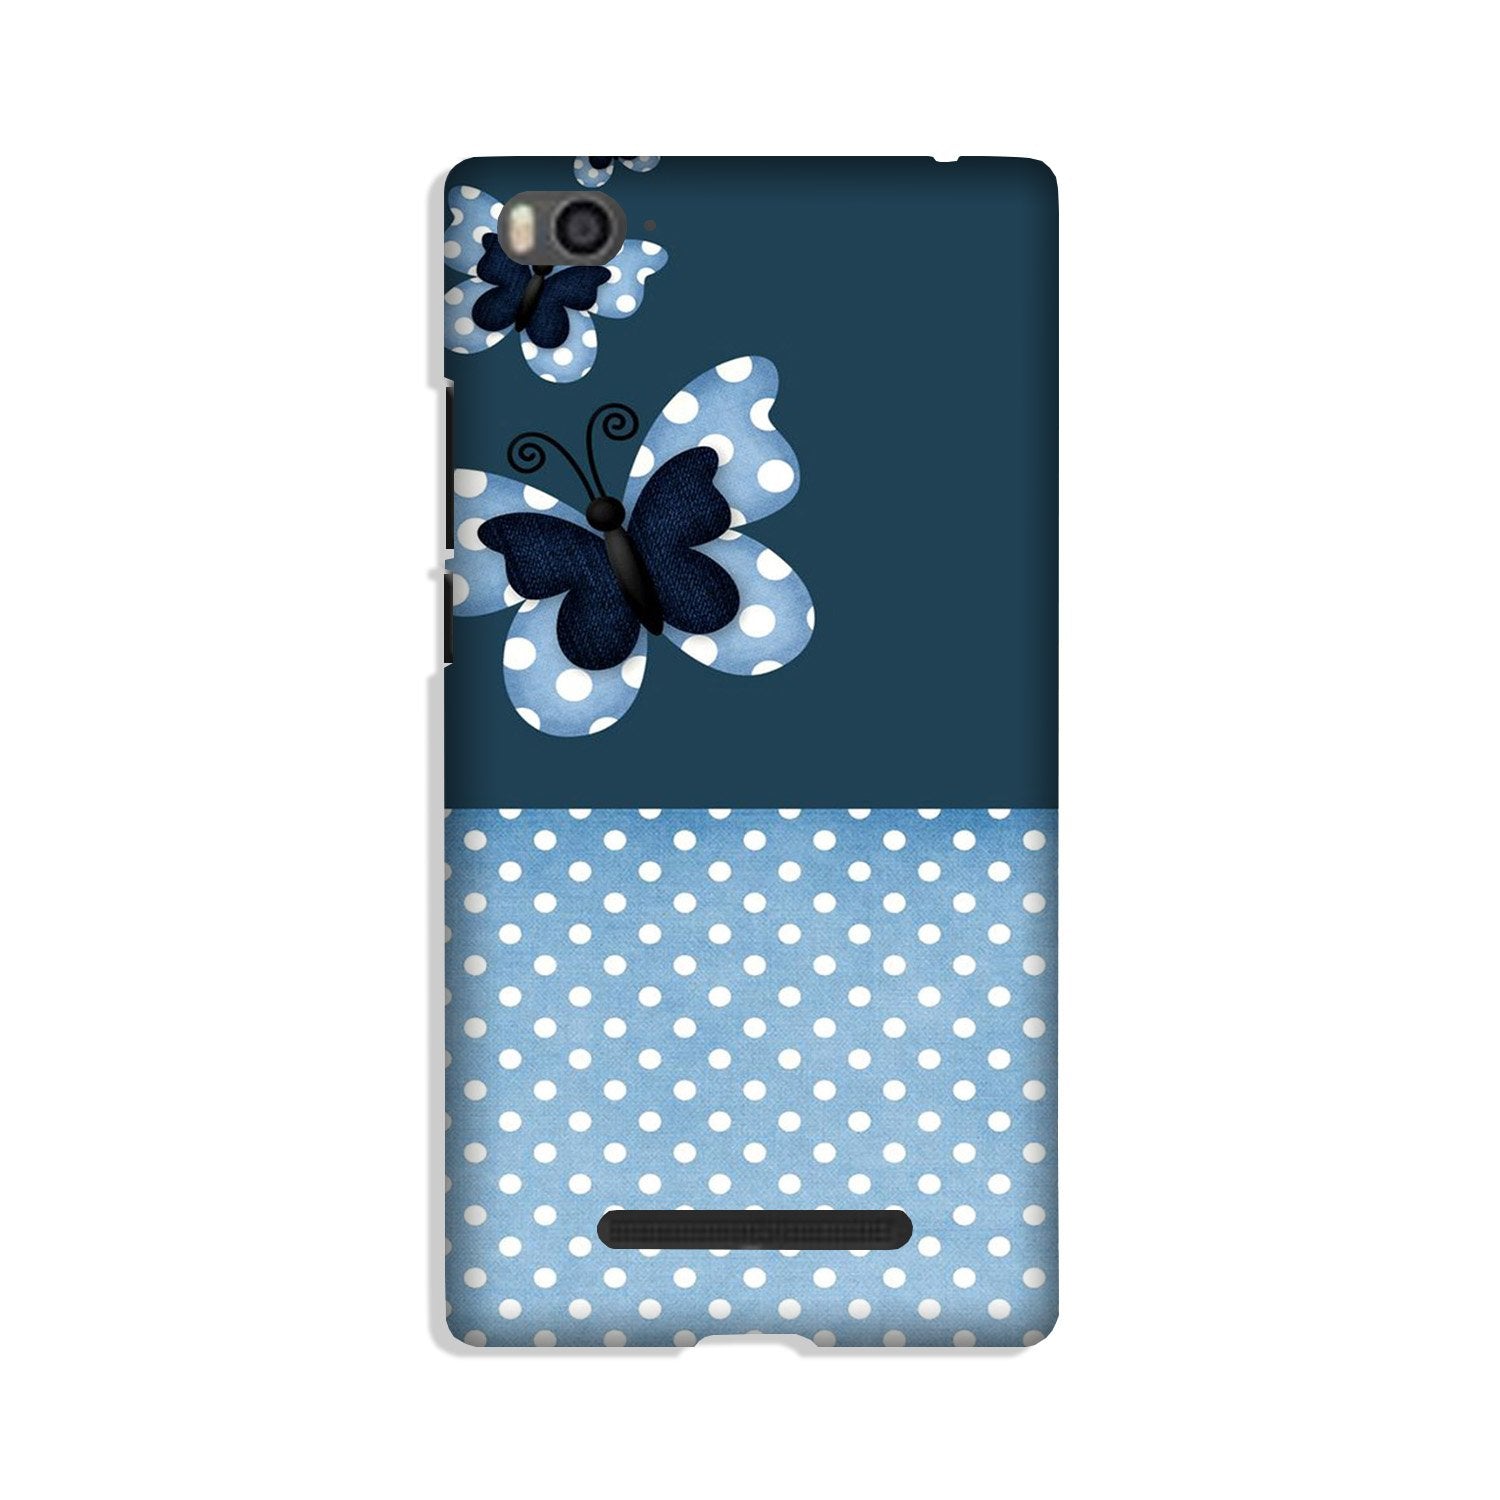 White dots Butterfly Case for Xiaomi Mi 4i